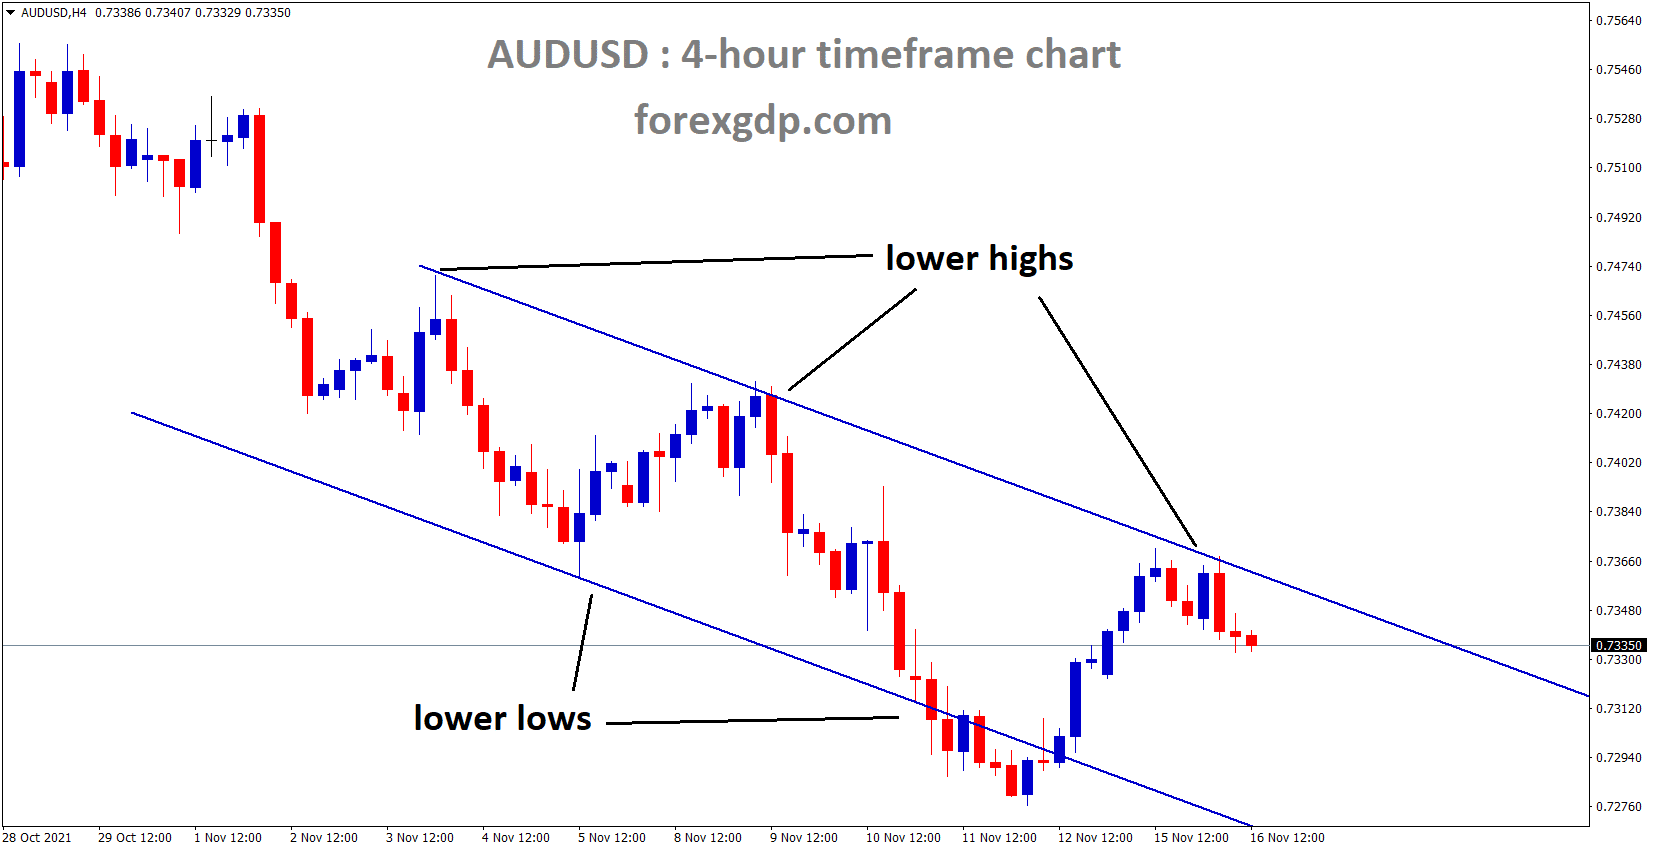 AUDUSD is moving in the Descending channel and the market fell from the Lower high area of the Channel